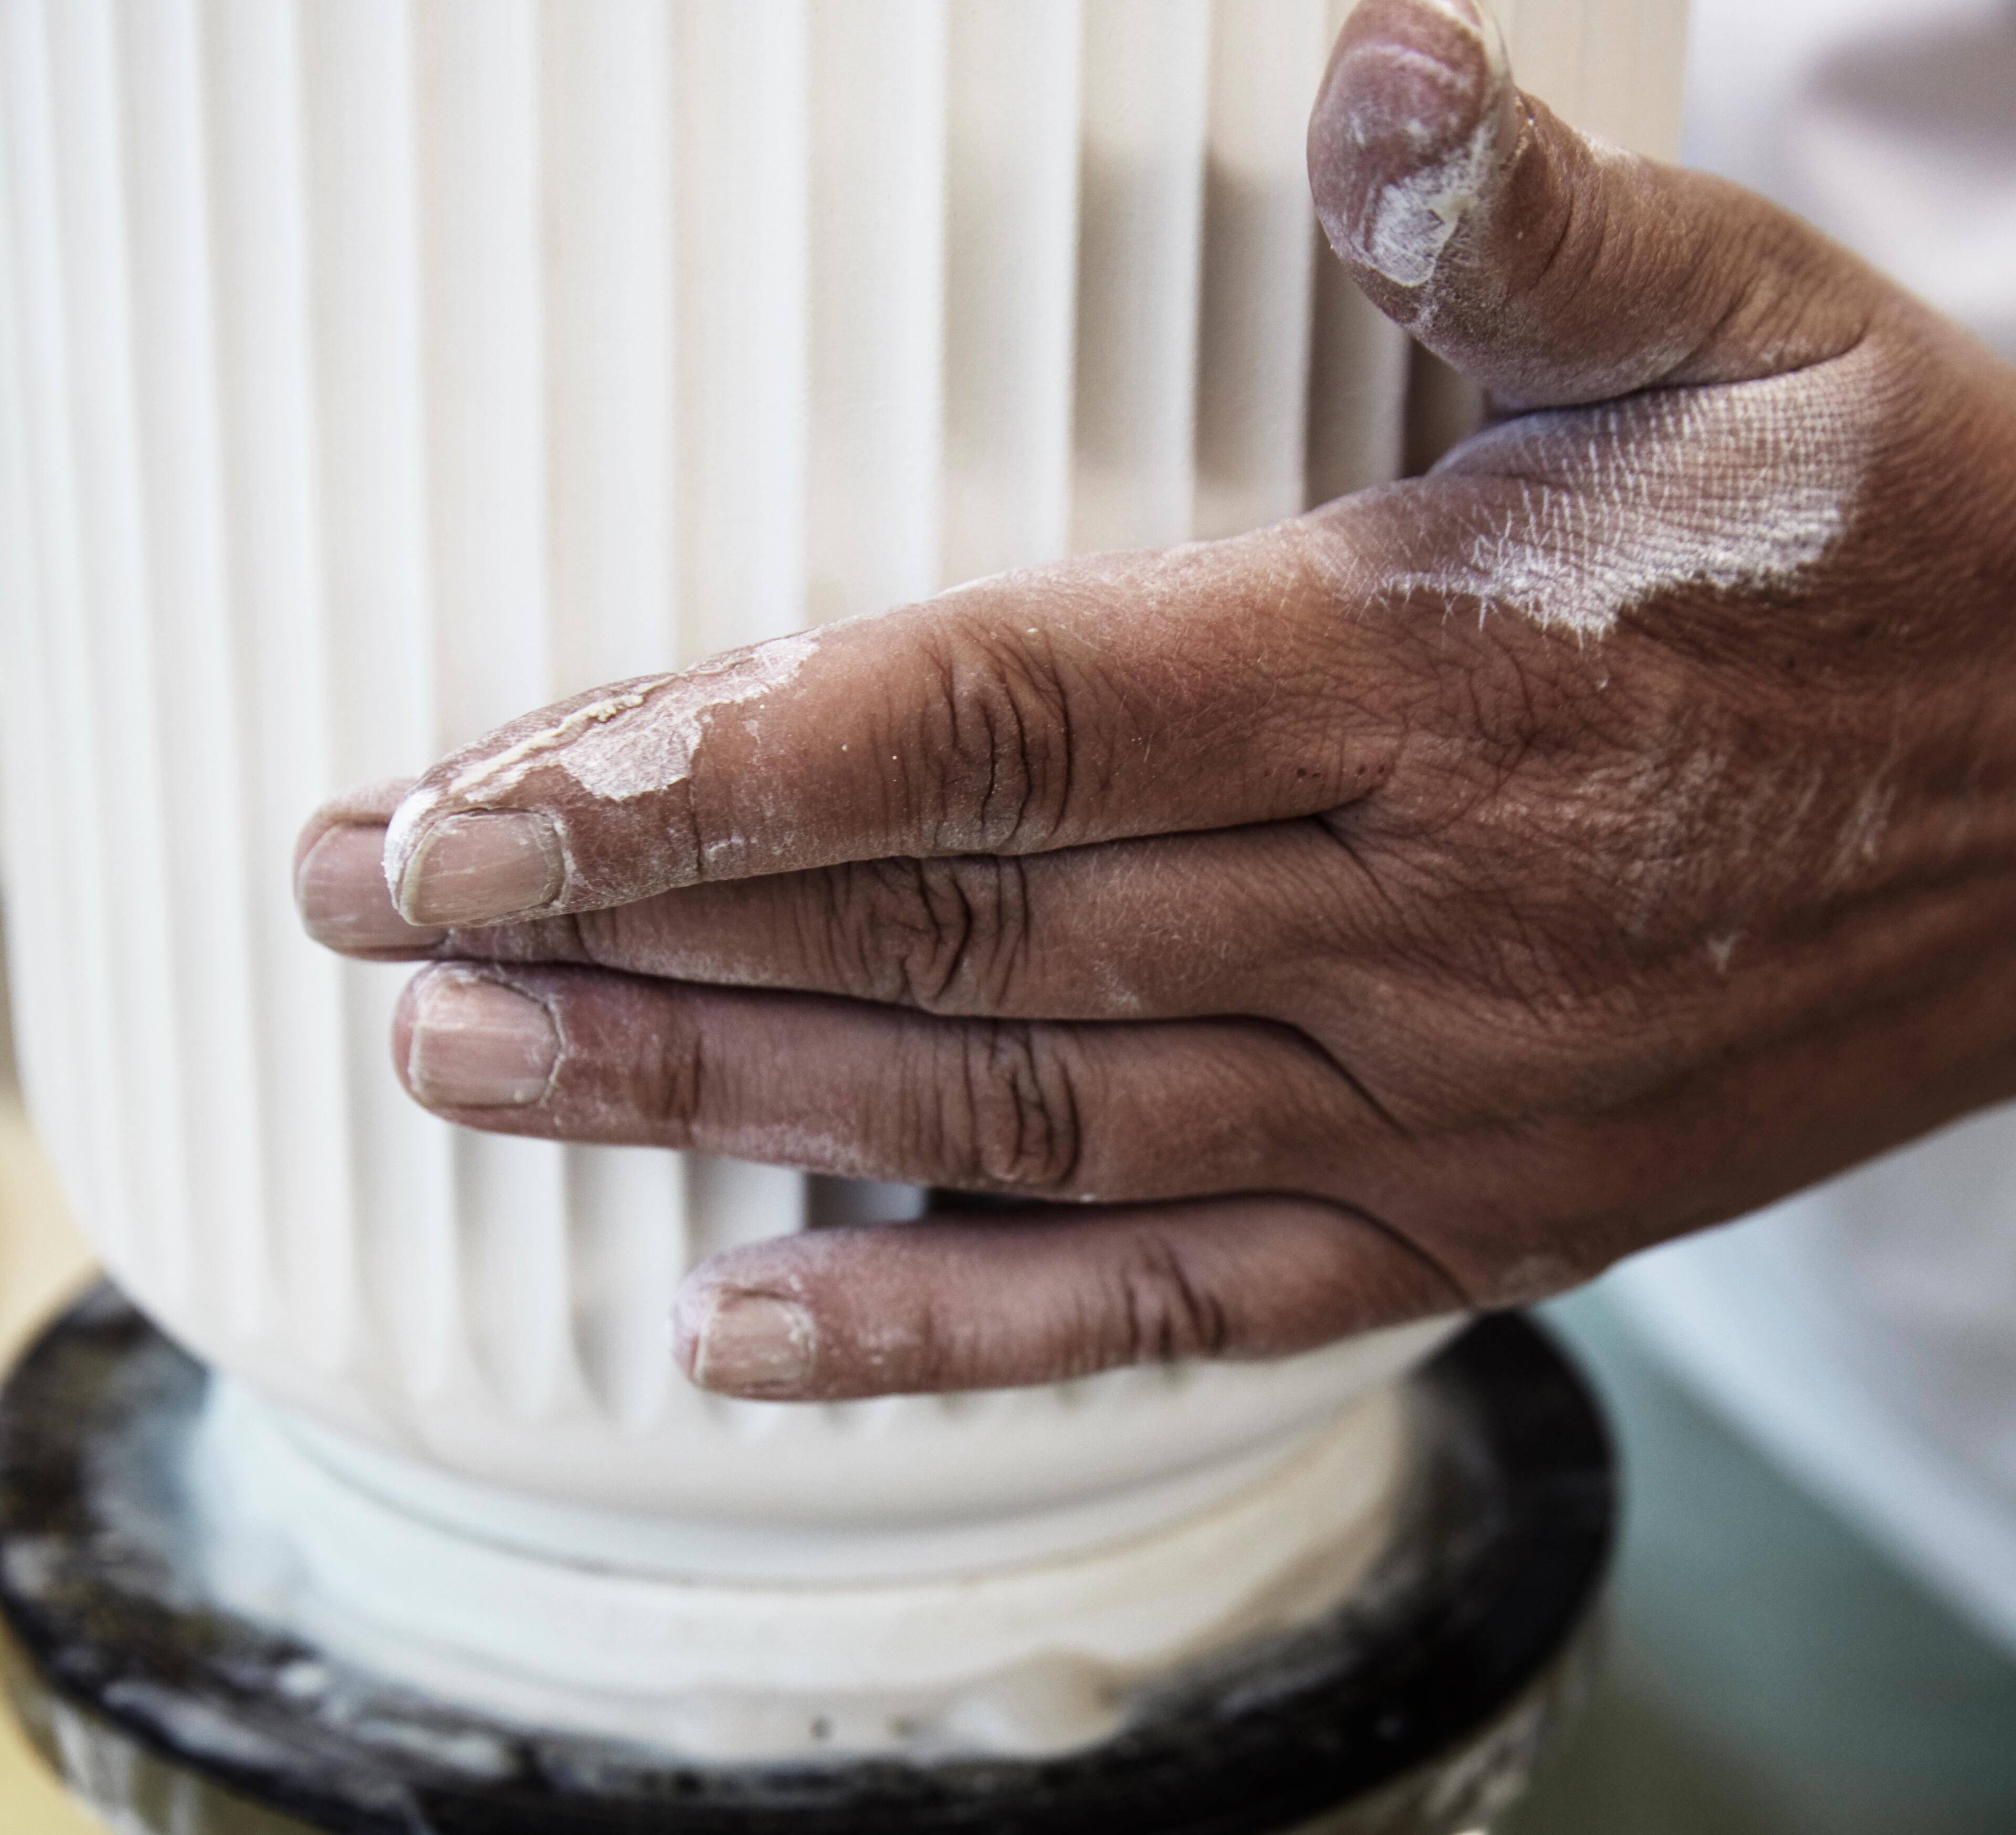 The Lyngby vase from Lyngby Porcelæn is made by hand